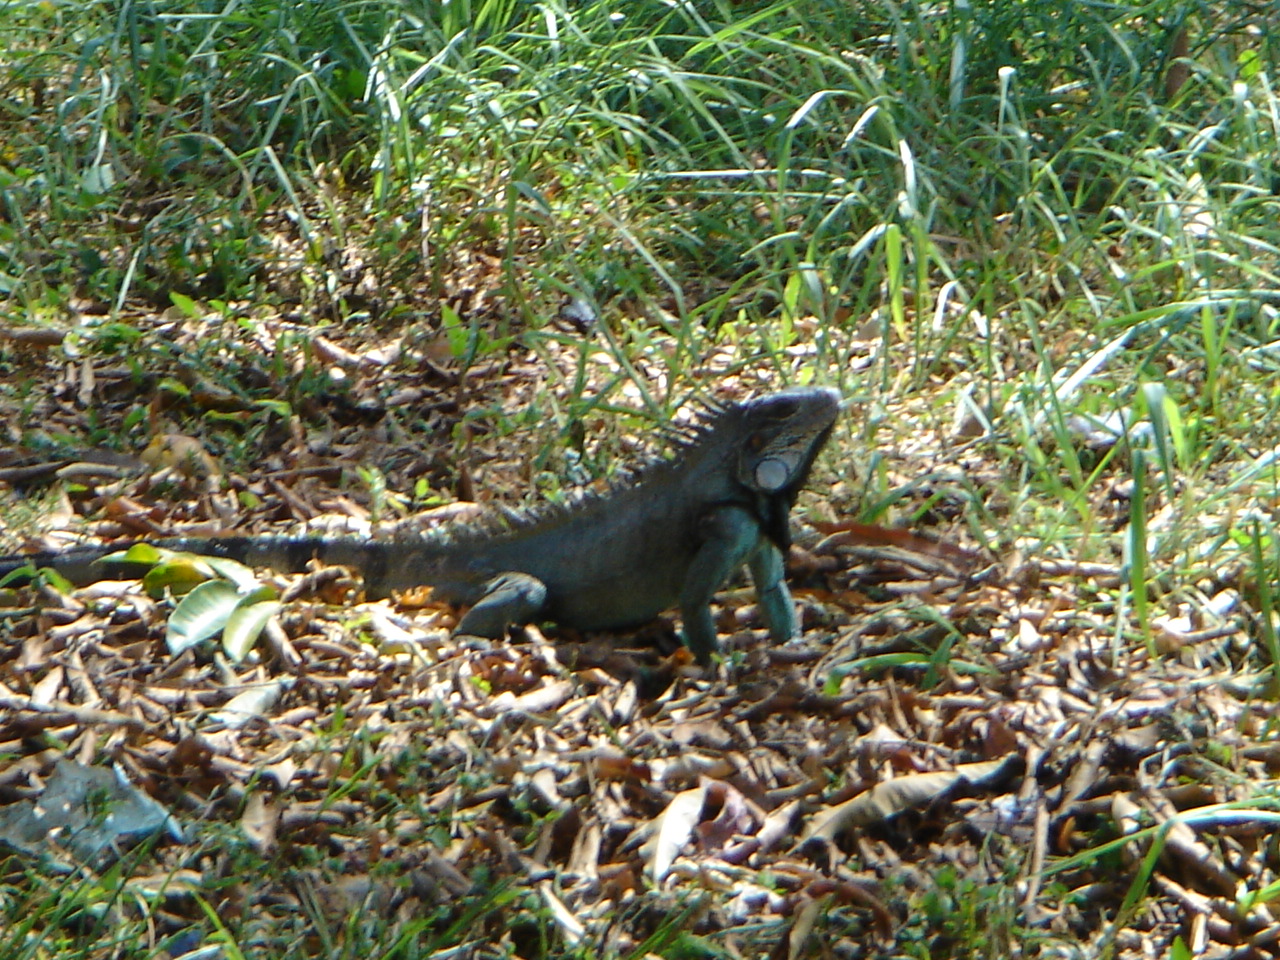 an iguan eating soing in the grass